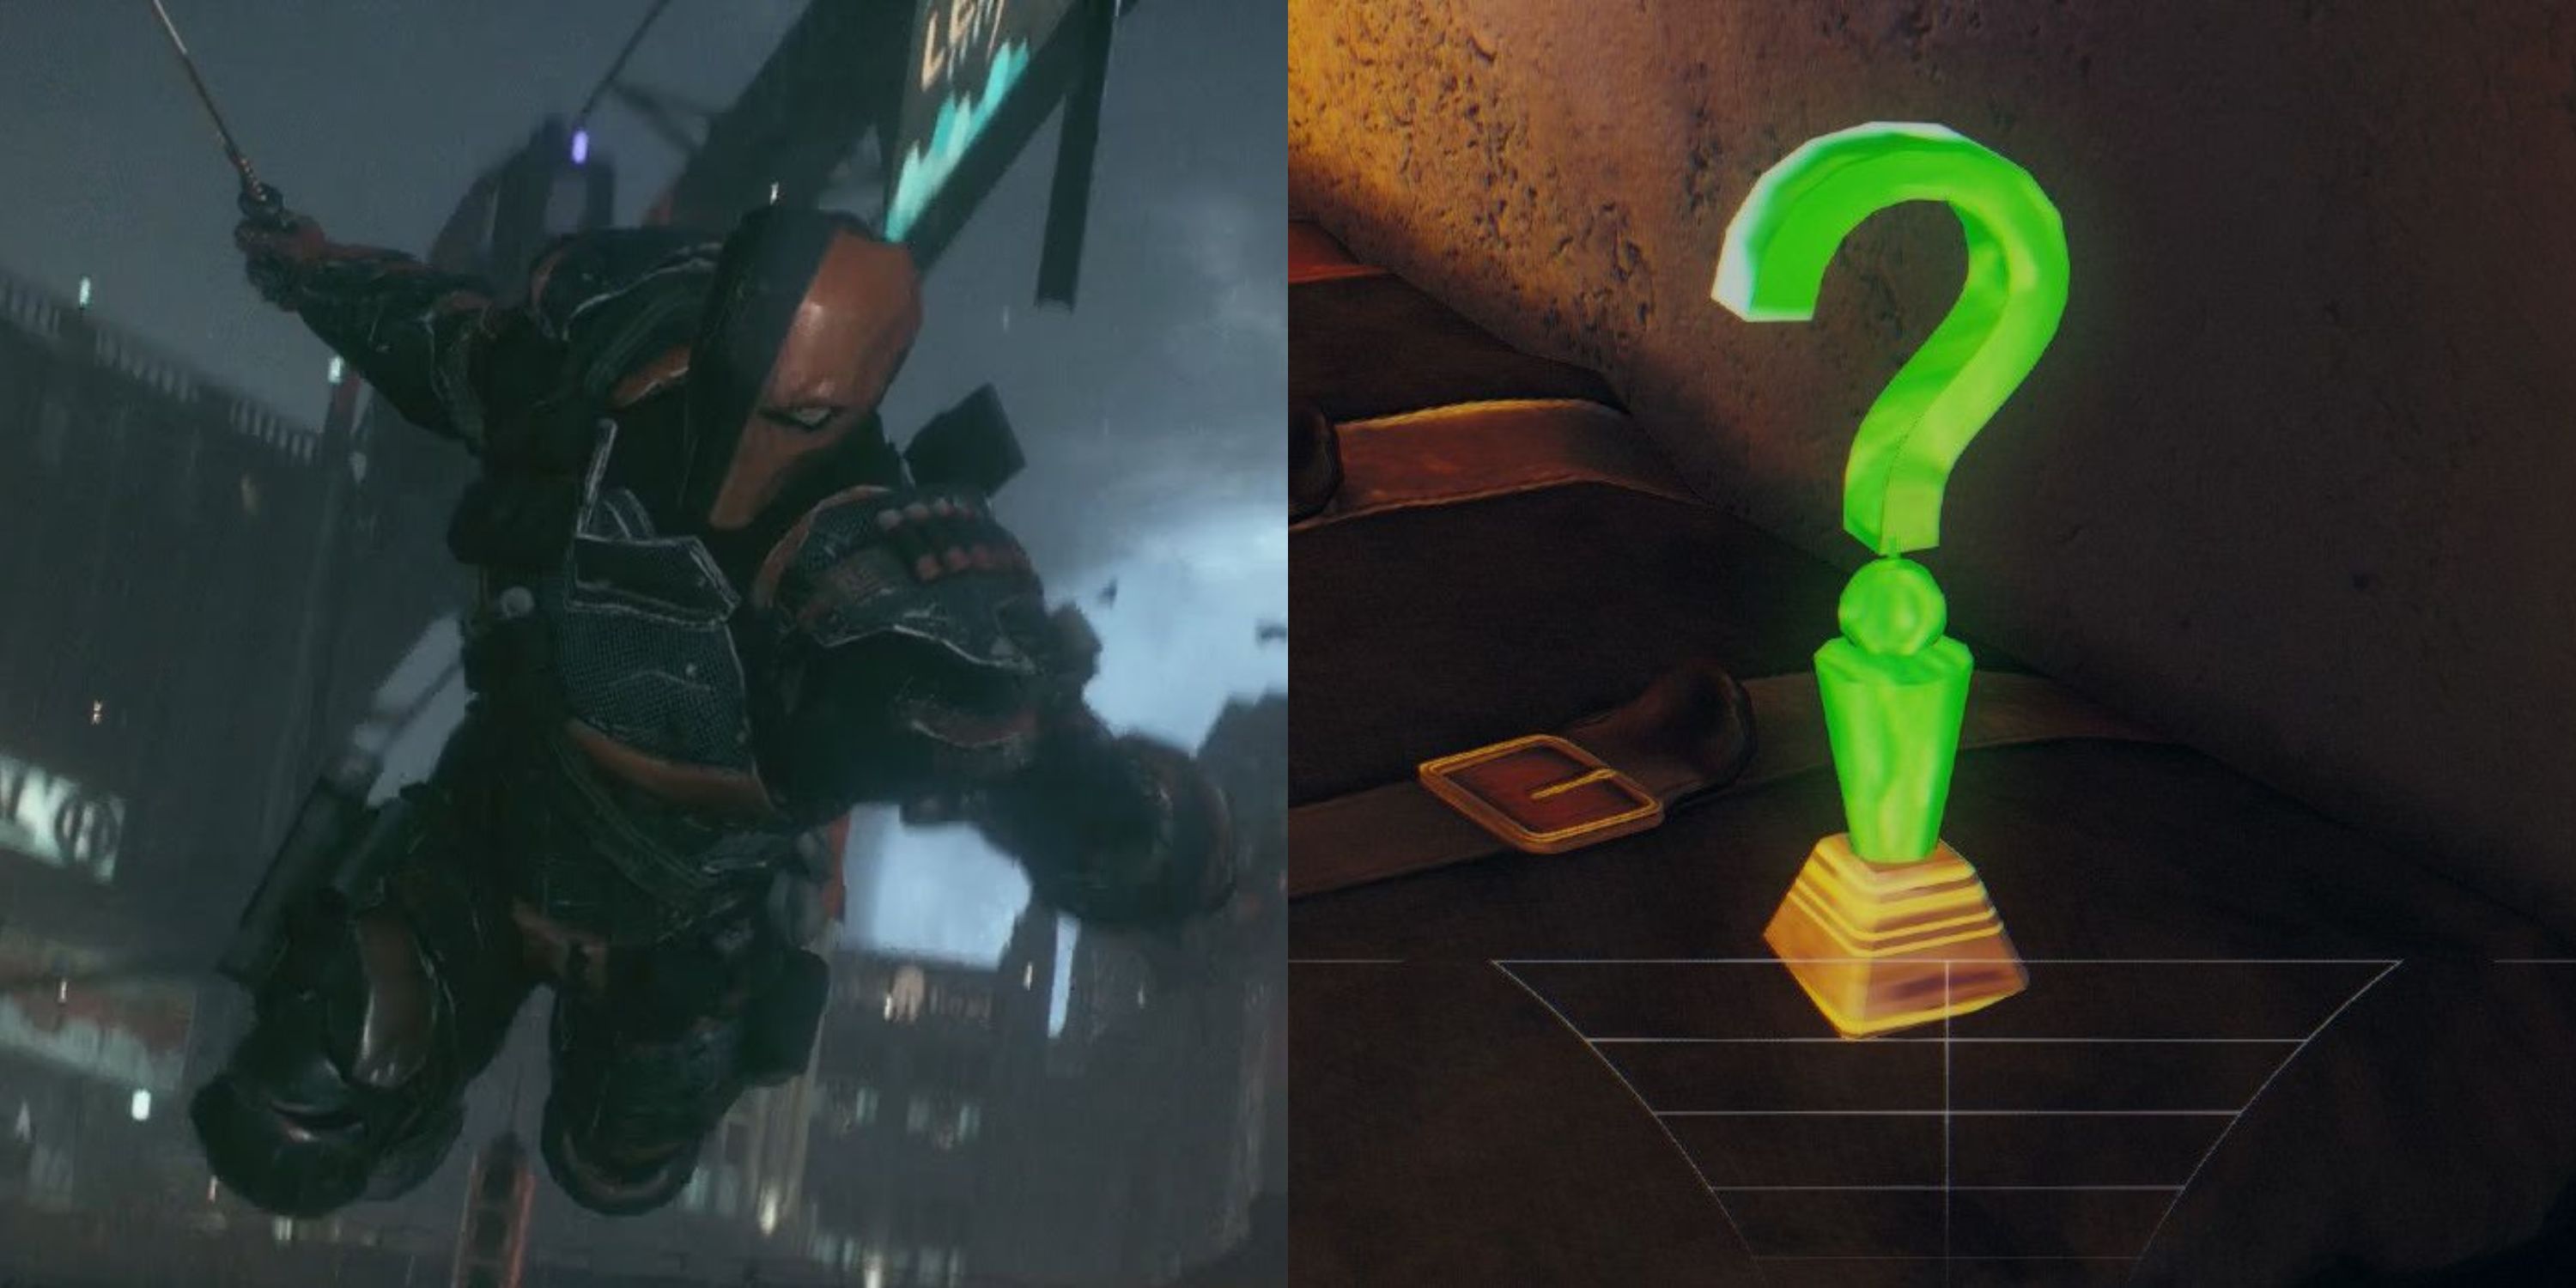 Featured image Deathstroke fight in Arkham Knight and a Riddler Trophy in Arkham Asylum